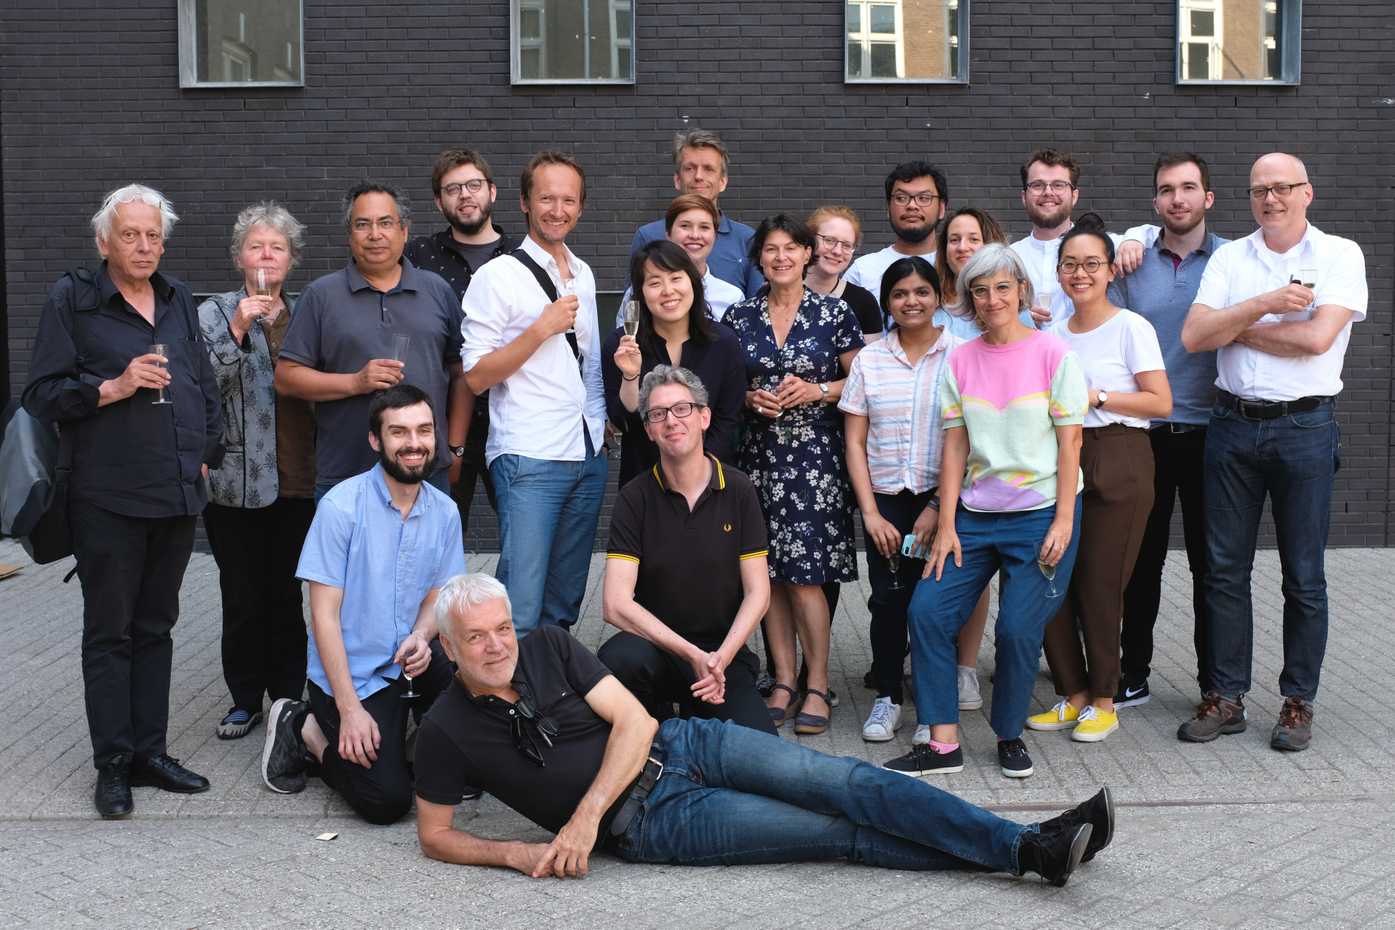 The graduating class of TypeMedia 2018 along with many of the TypeMedia teachers